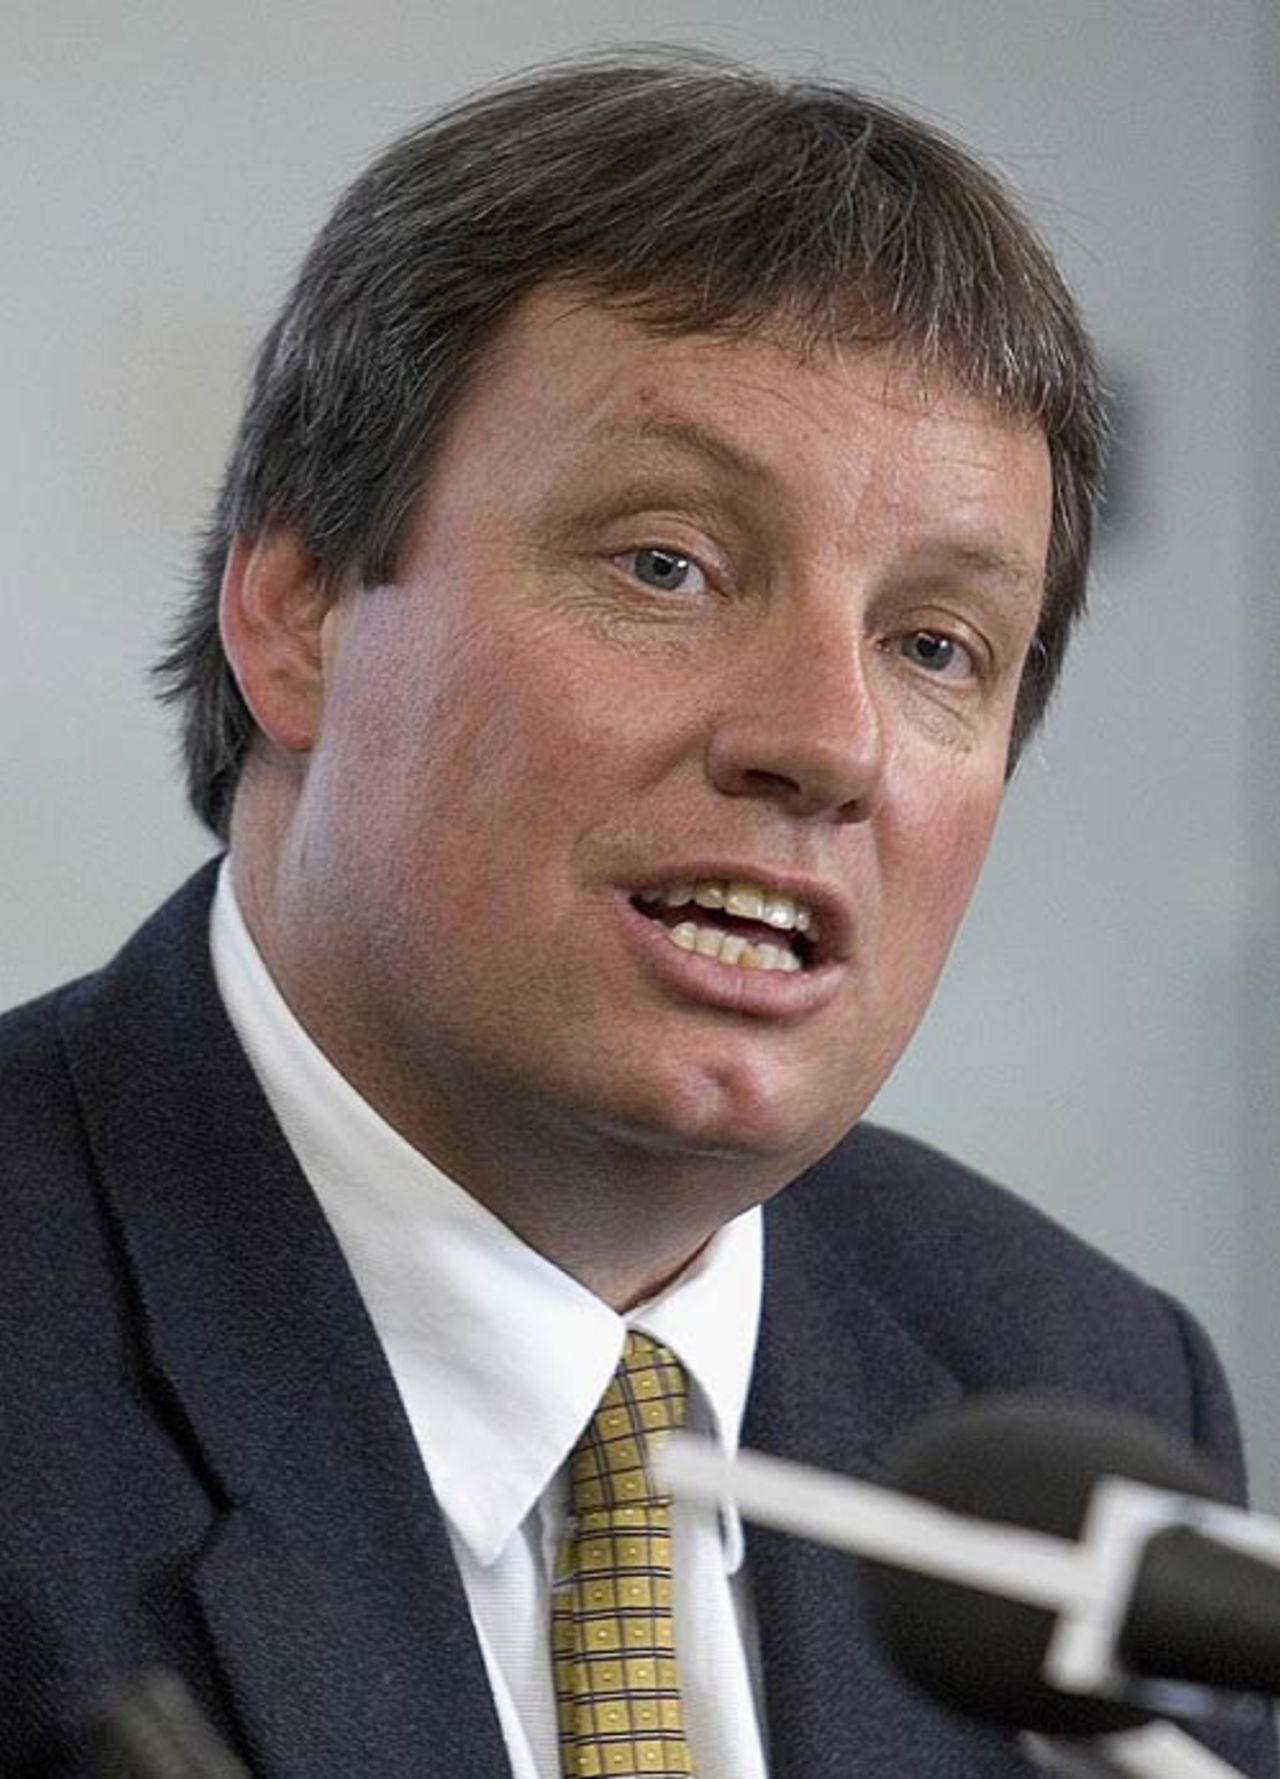 Martin Snedden, New Zealand Cricket chief executive, addresses the media after he announced that he would leave New Zealand Cricket in May to head the company organising the rugby World Cup 2011, December 19, 2006